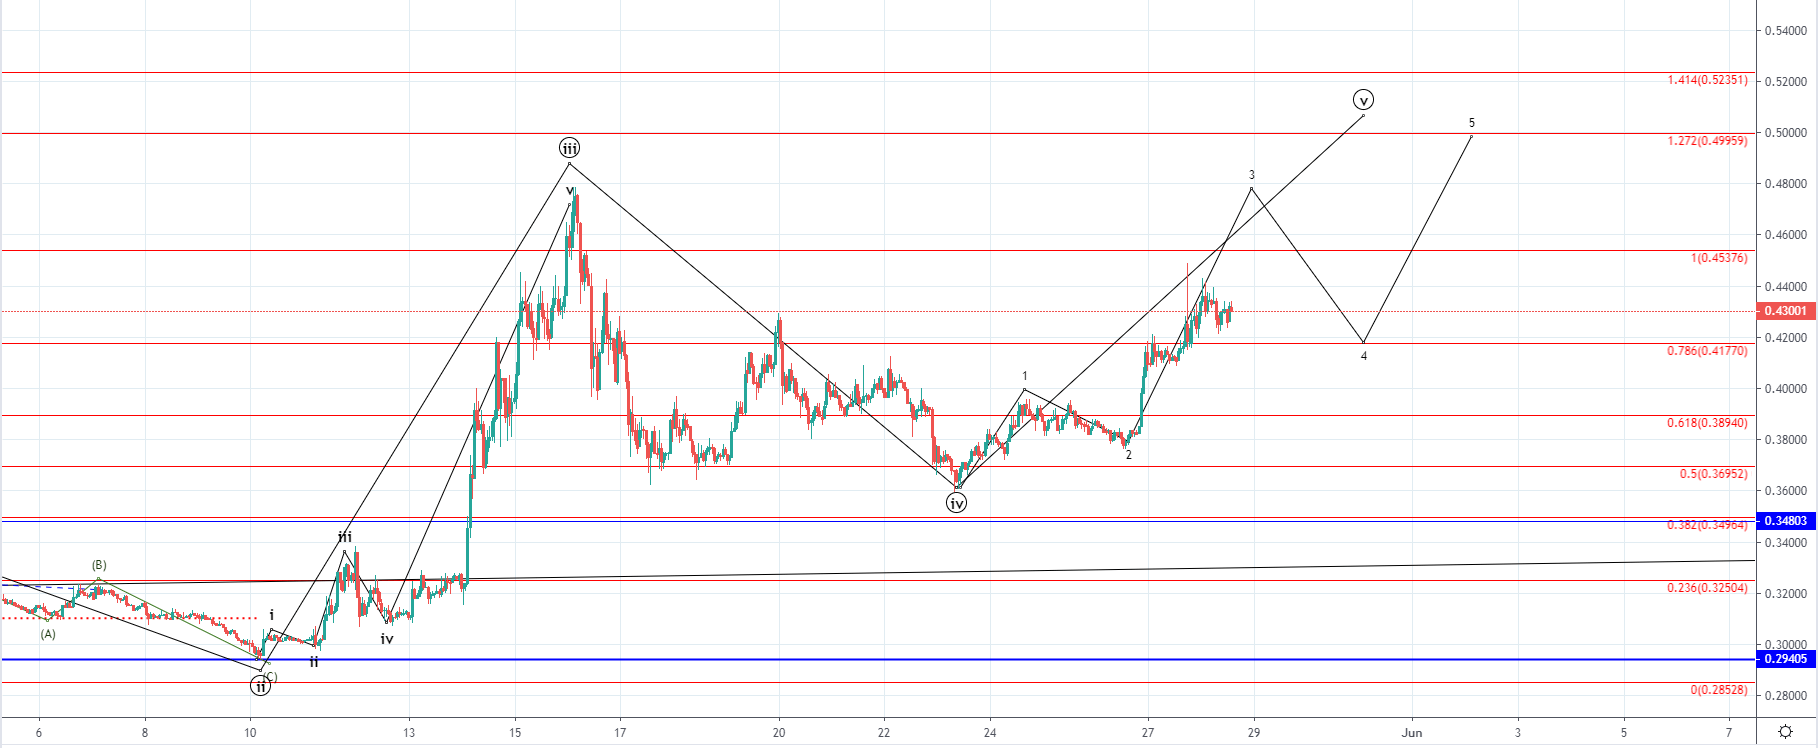 BTC/USD and XRP/USD: another minor increase before a downturn expected